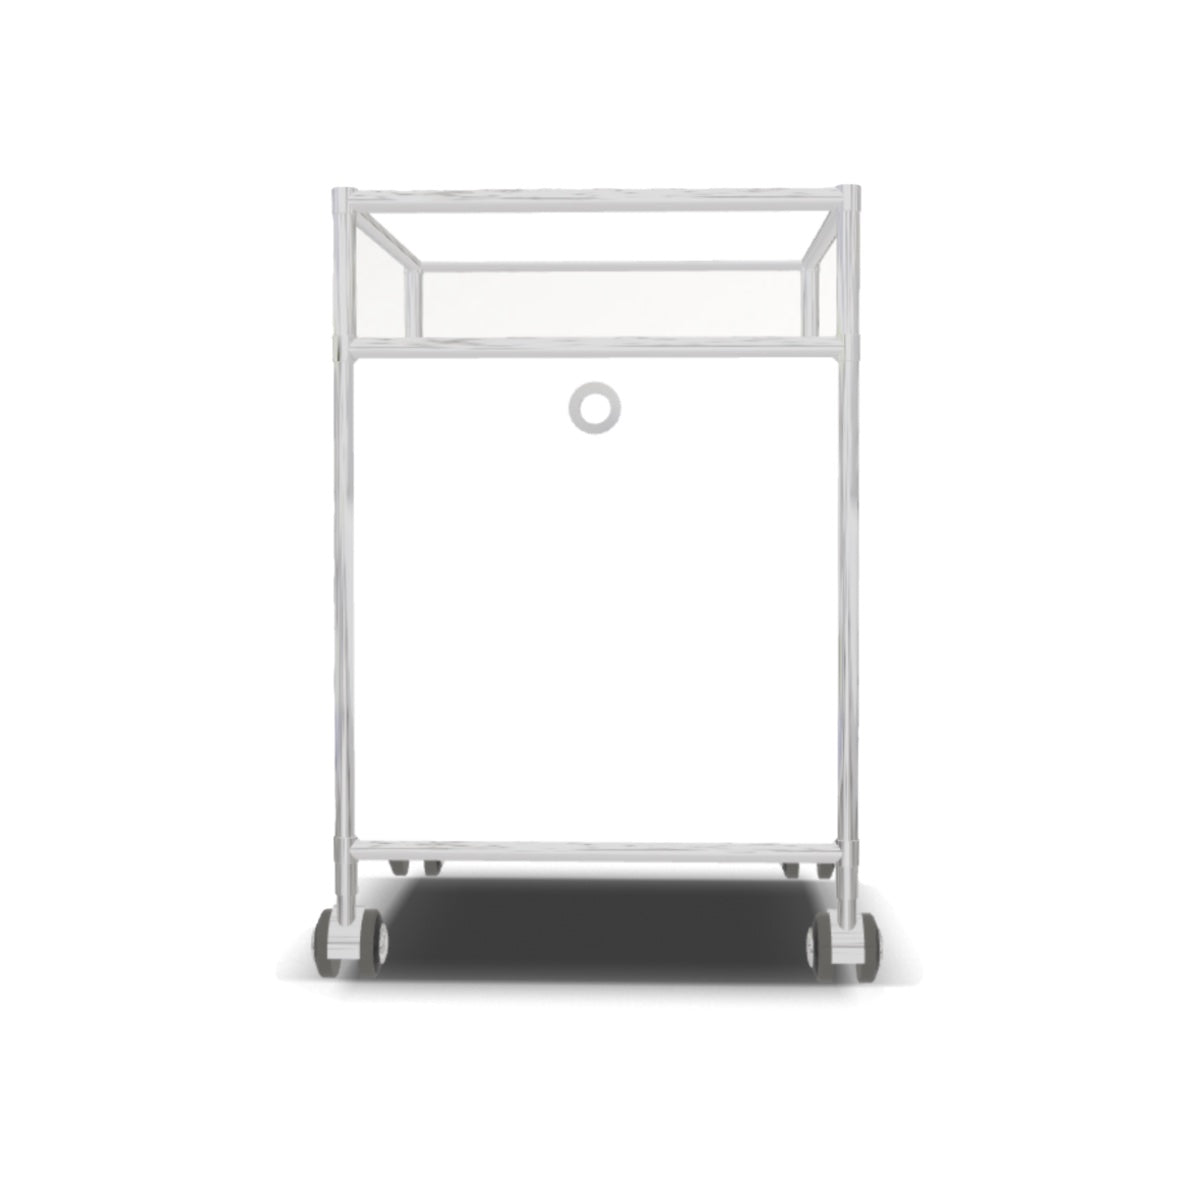 System4 Drawer Unit with 1 Drawer on Casters, 39 x 39 x 67 cm, White